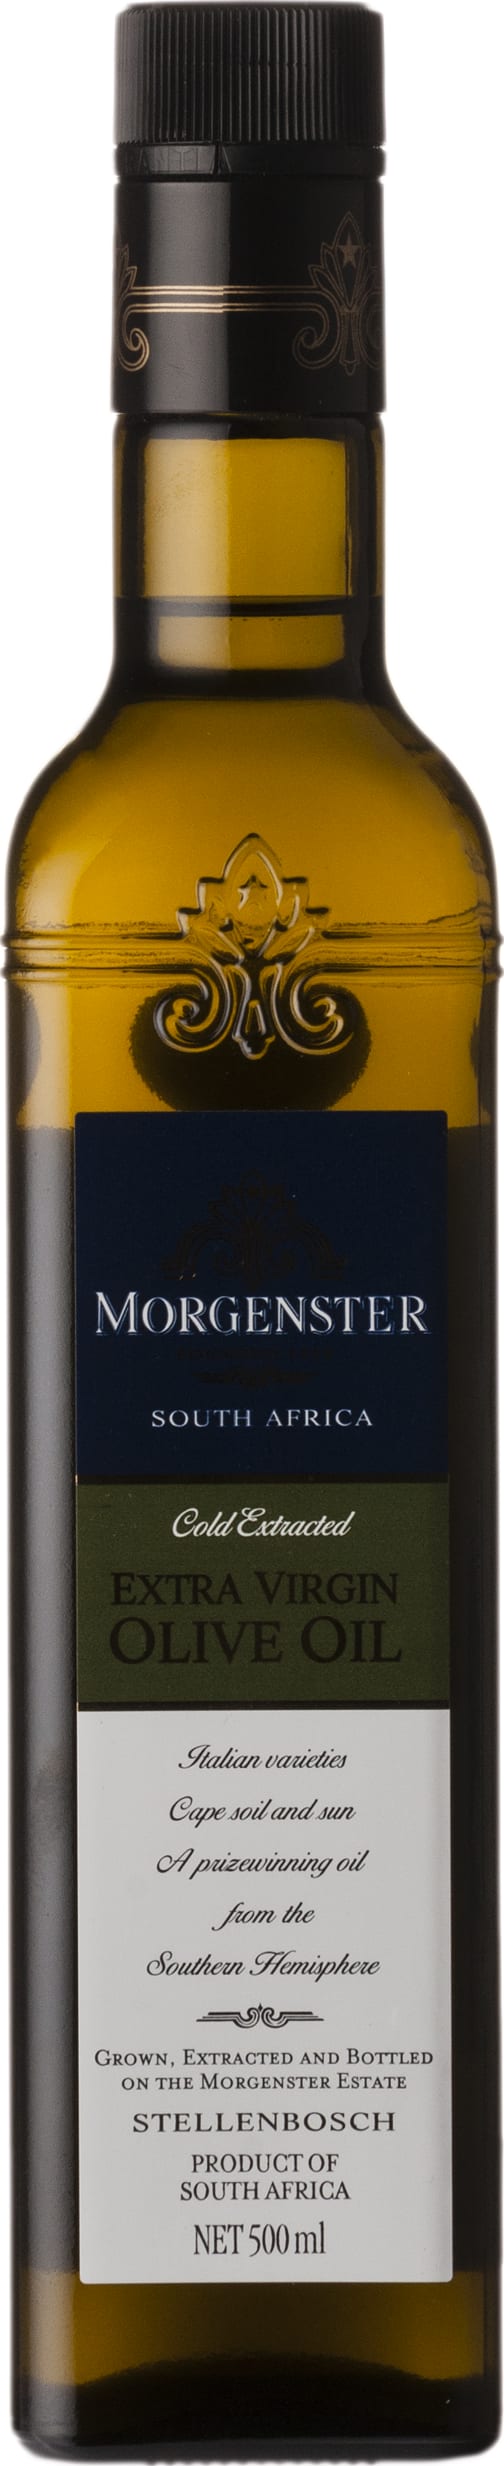 Morgenster Extra Virgin Olive Oil 50cl 50cl NV - Buy Morgenster Wines from GREAT WINES DIRECT wine shop